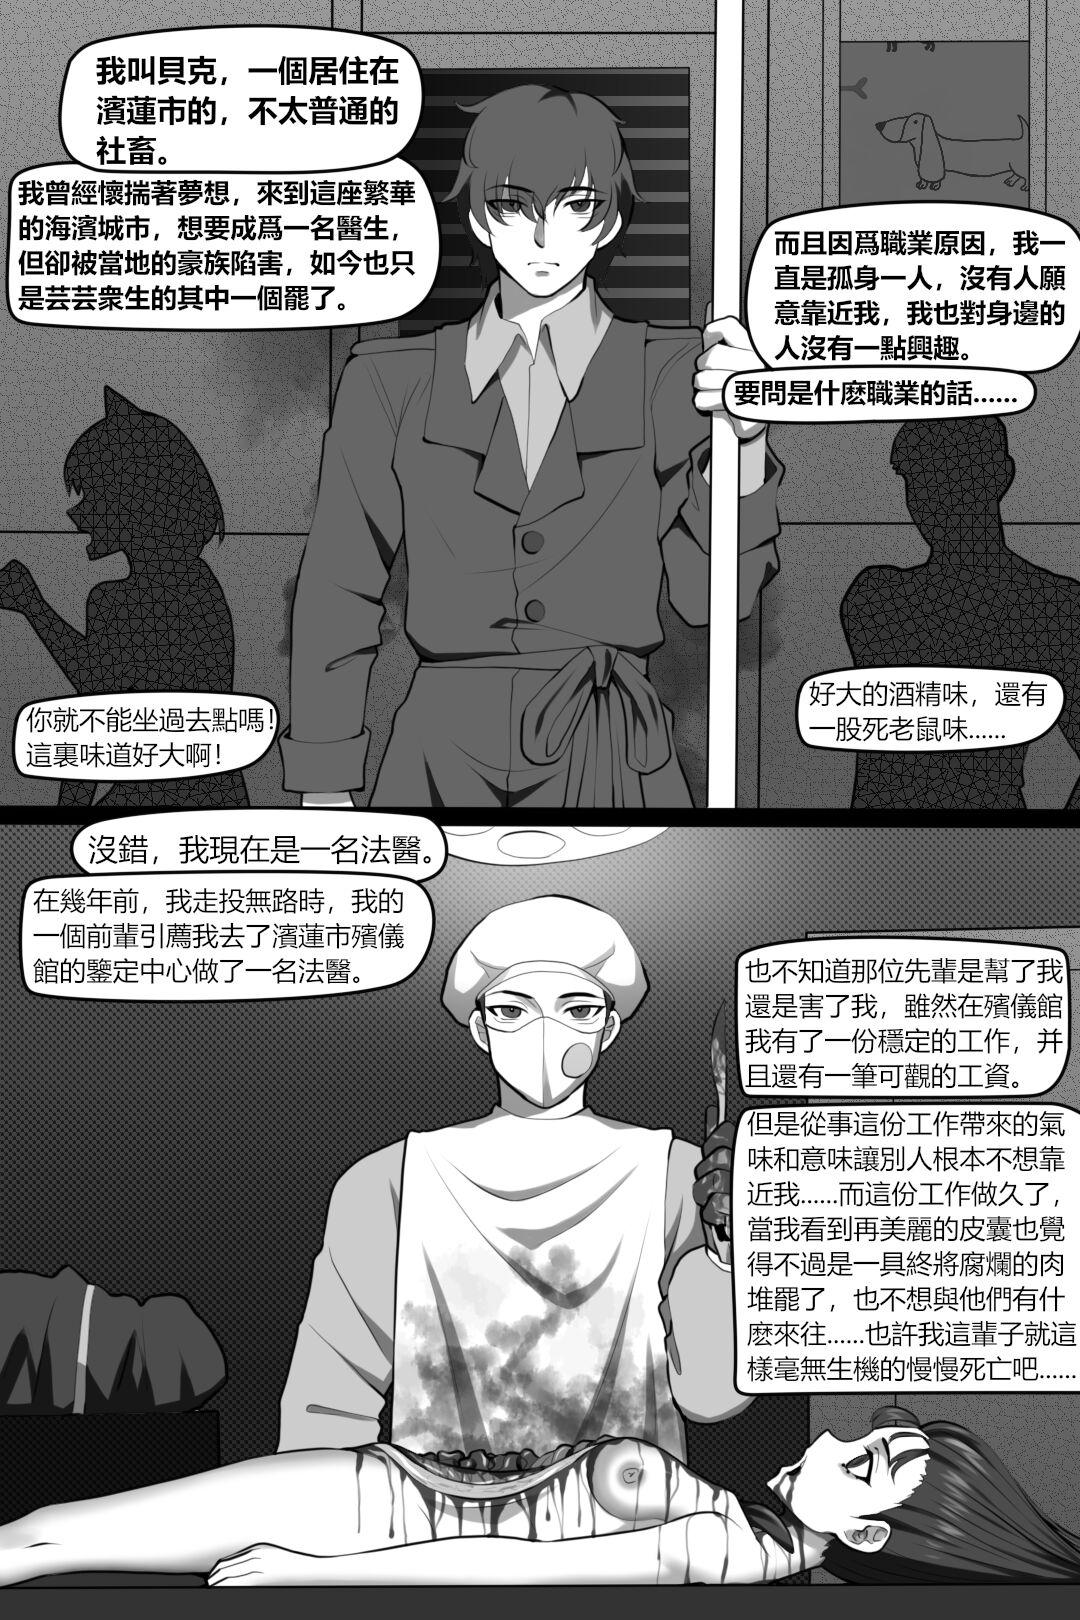 British Bin Lian City Stories Chapter 3: Corrupted Forensic - Original Hardsex - Page 3